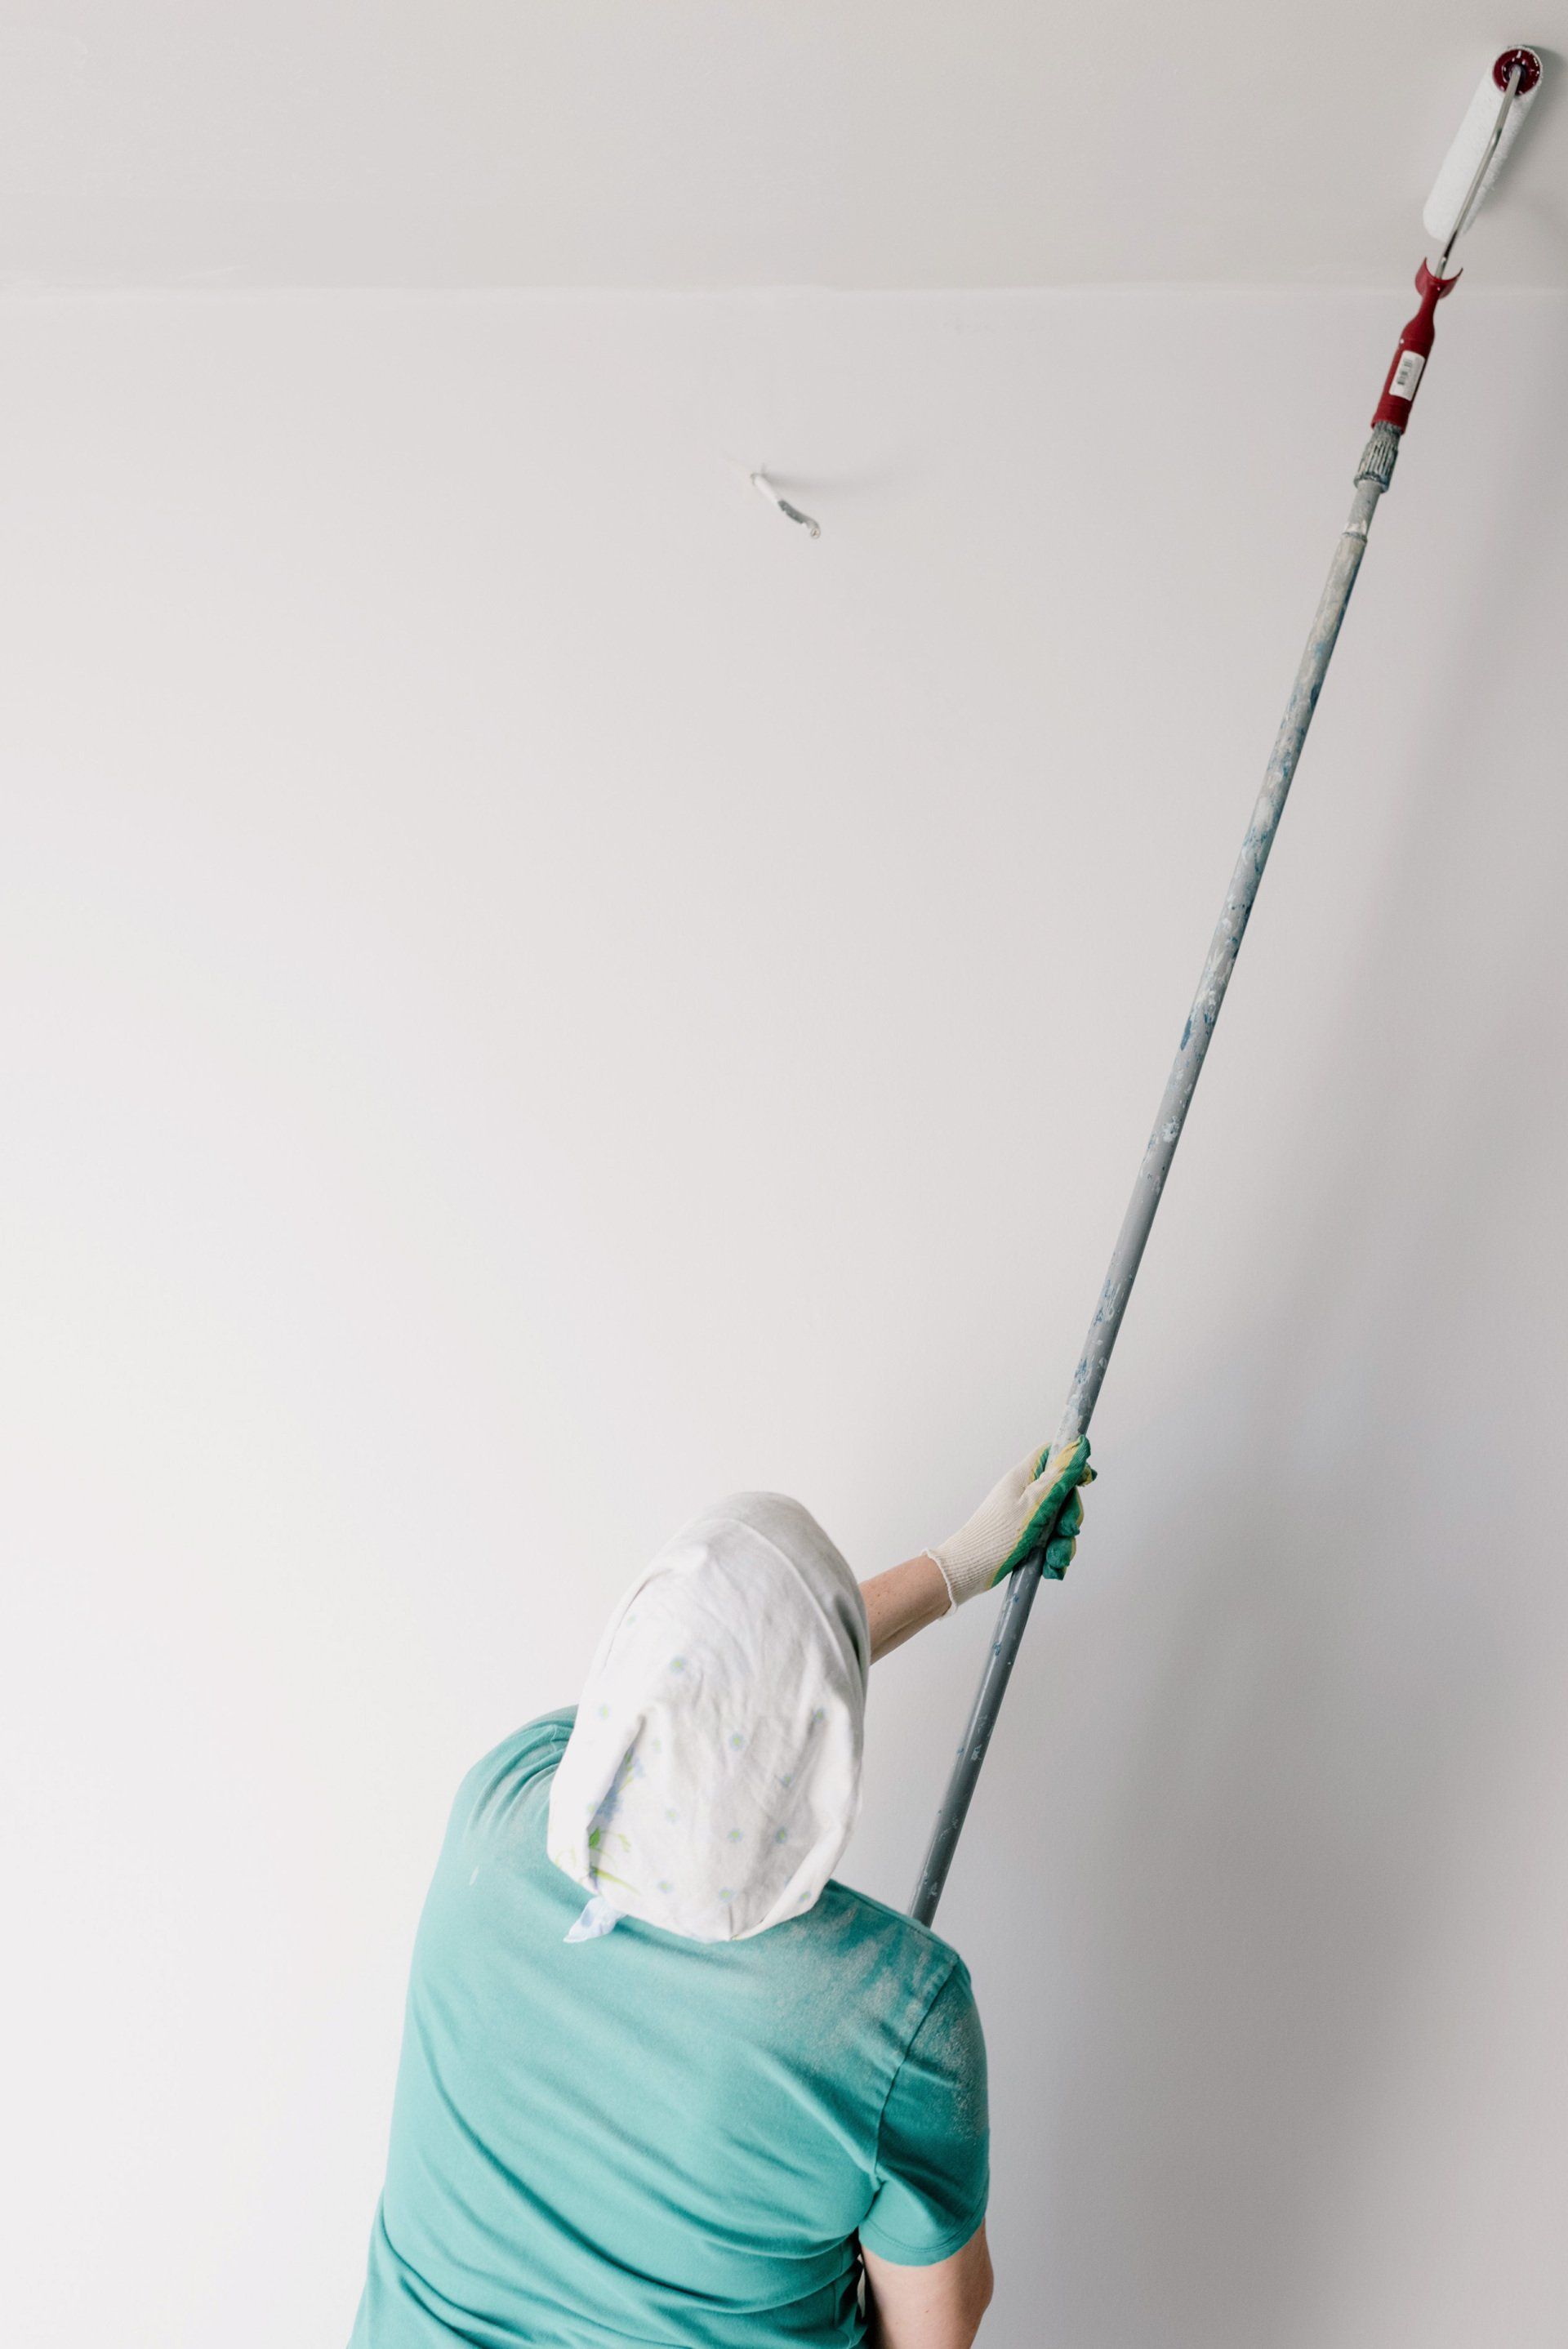 A picture of a painter using an extended roller to paint a ceiling